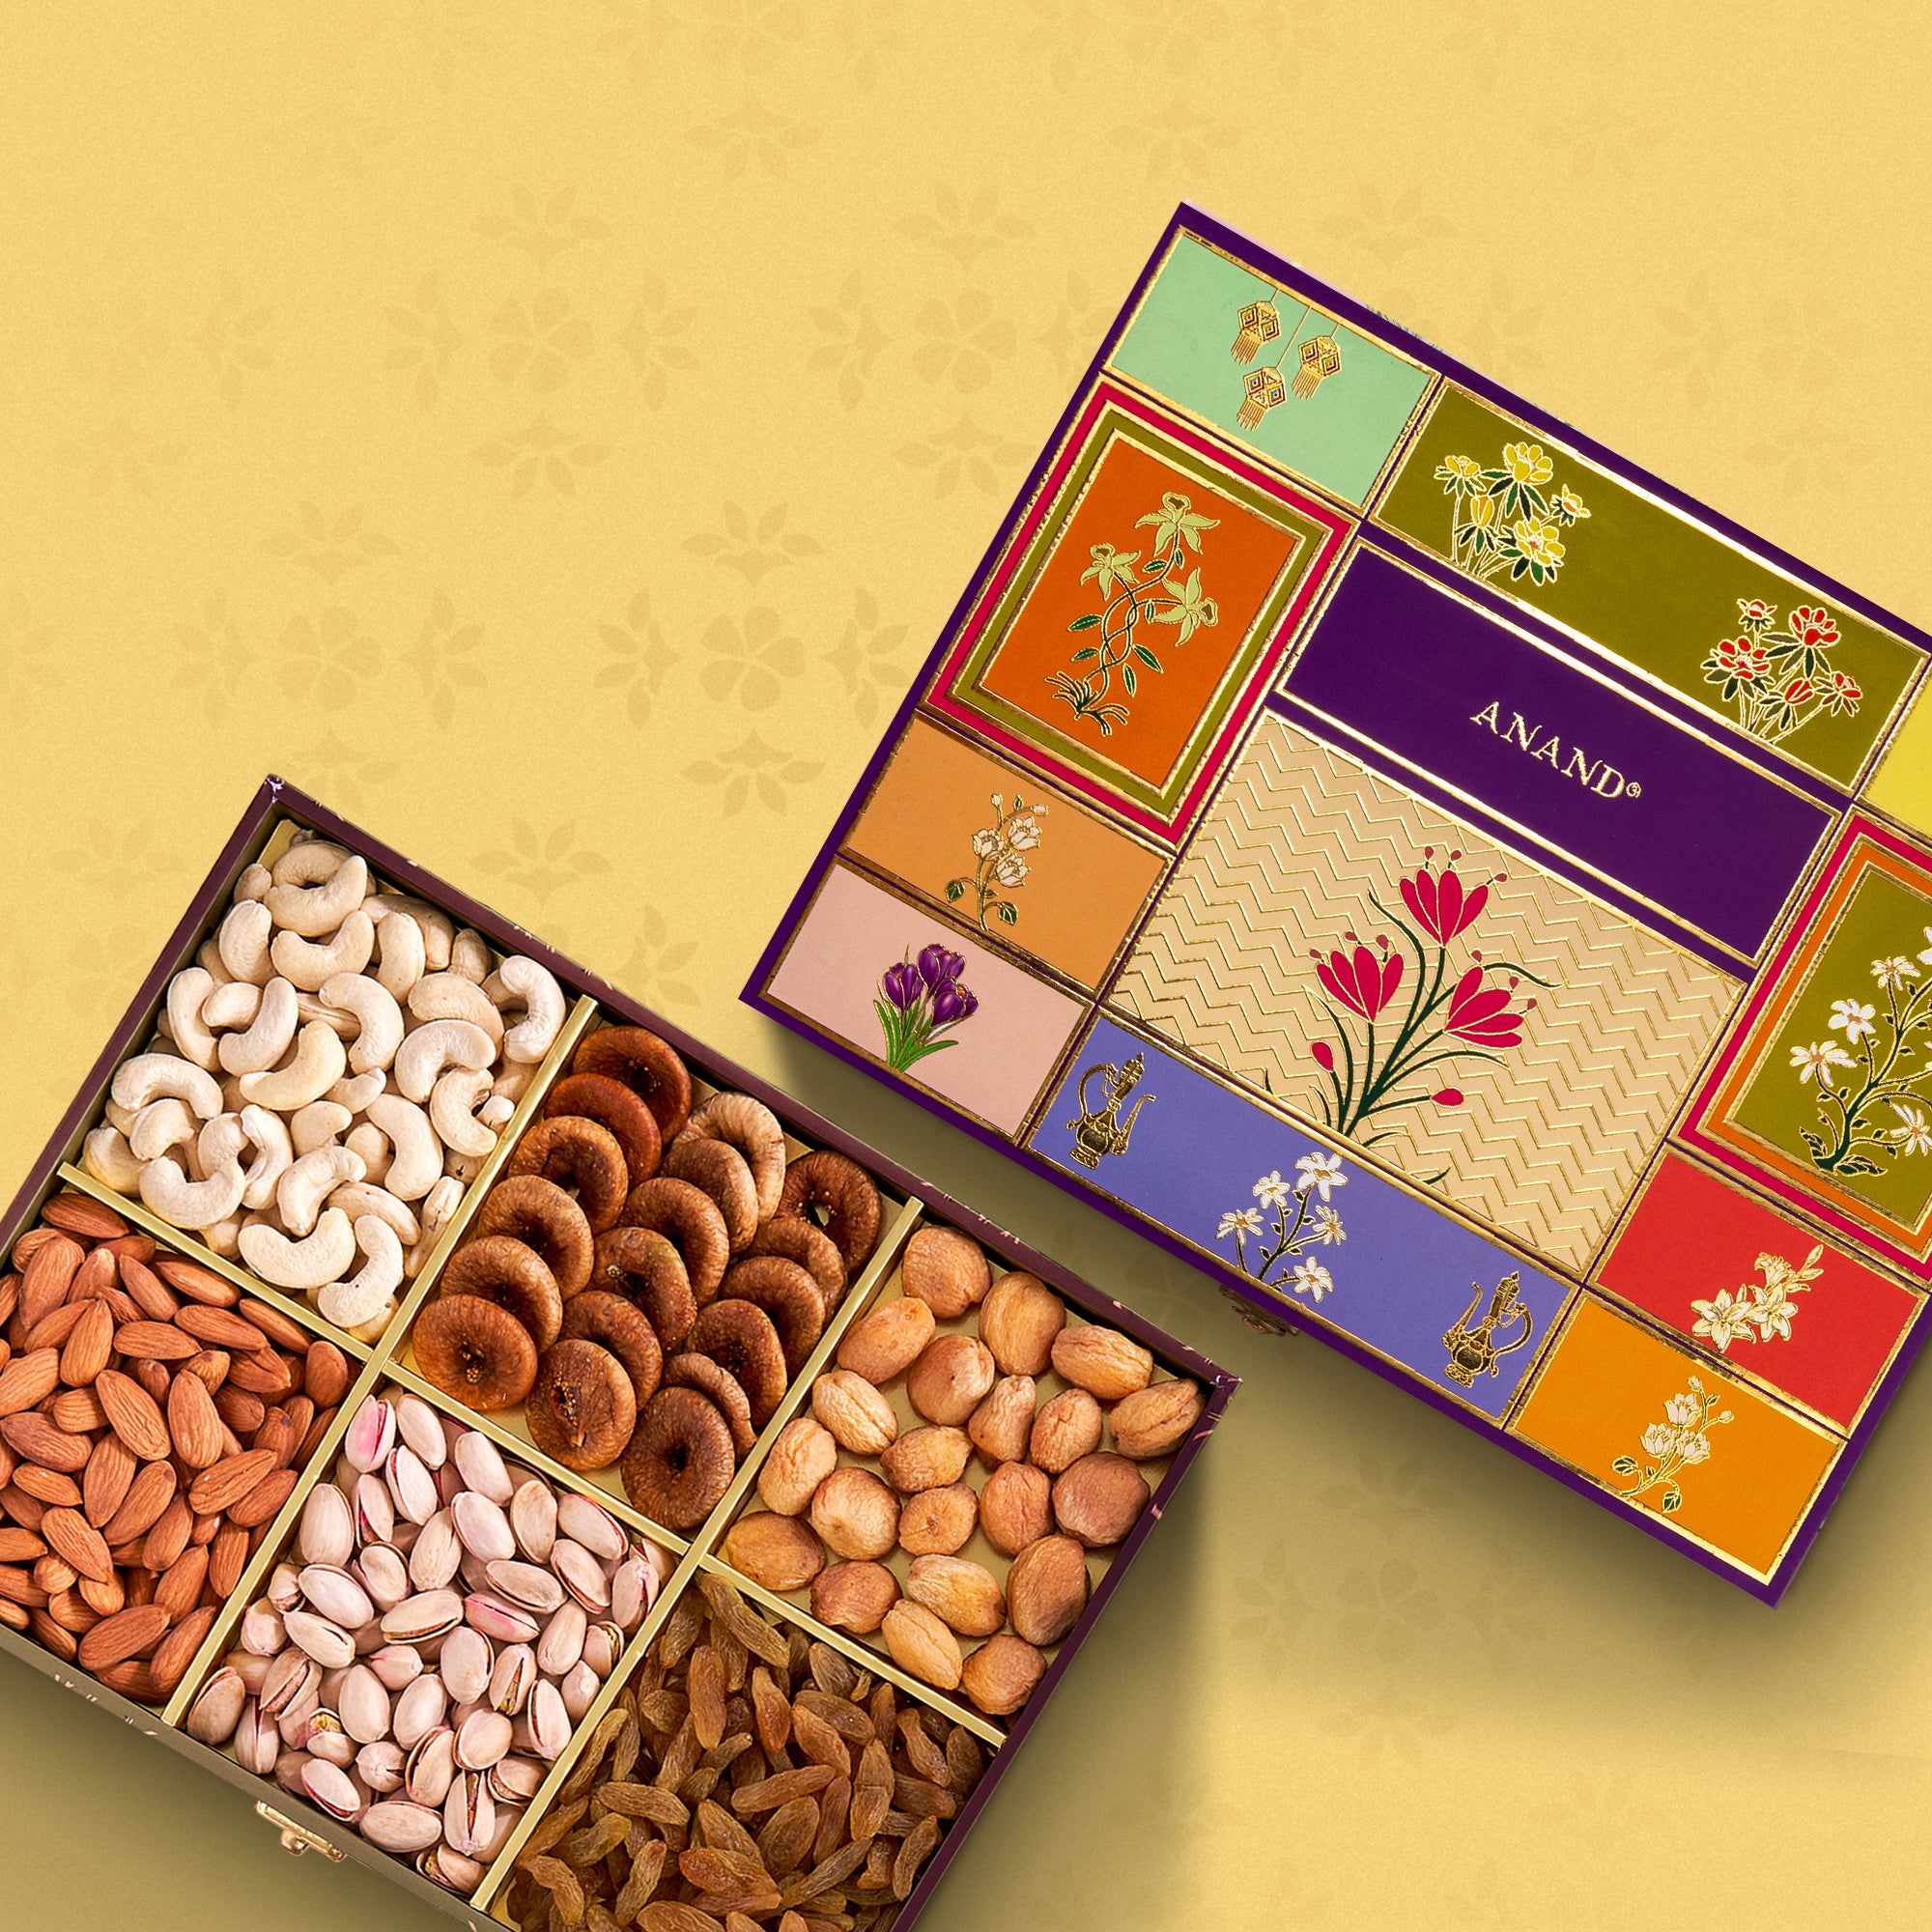 NUTRI MIRACLE Diwali Dry Fruit & Nut Gifts Hamper/Box/Basket With Ethnic  Shubh Labh Door/Wall Hanging,Paglya/Charan Paduka And Decorative Wax Diya  For Corporate Gift/Business Promotion/Client/Employee,1.05kg Wooden Gift Box  Price in India - Buy